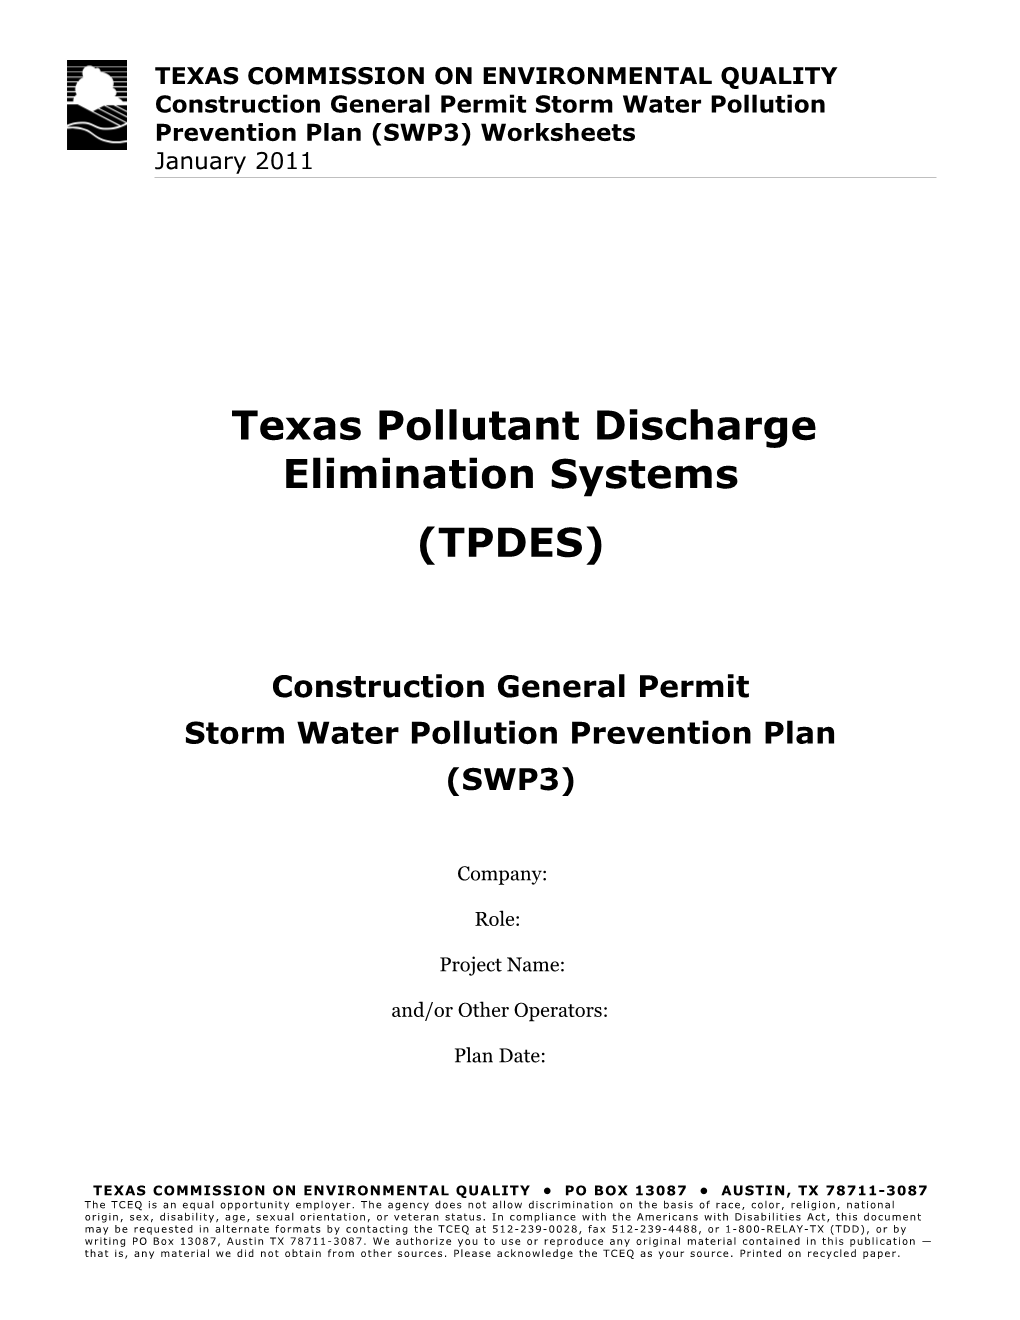 Texas Pollutant Discharge Elimination Systems